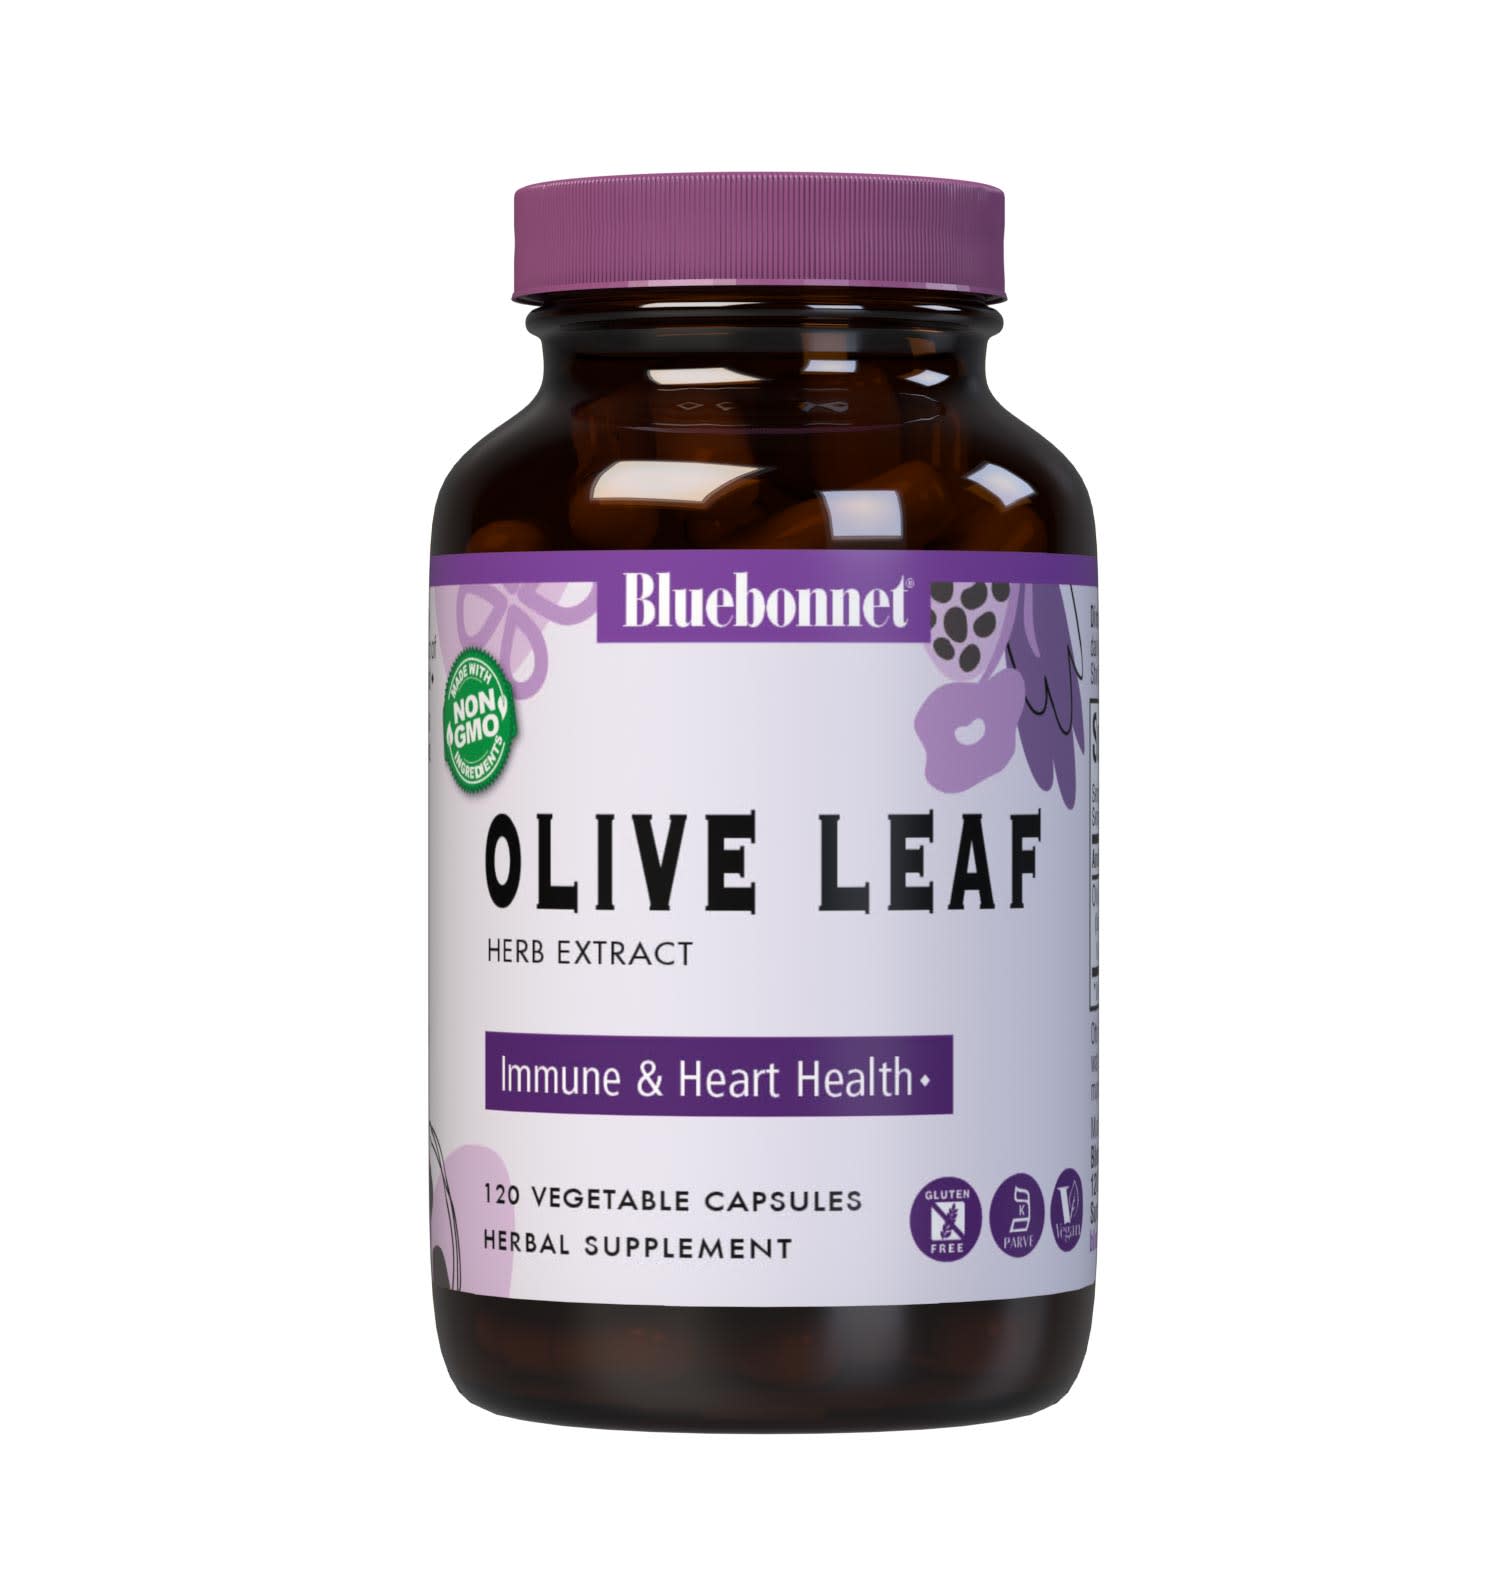 Bluebonnet’s Olive Leaf Herb Extract 120 Vegetable Capsules are formulated with a standardized extract of oleuropein, the most researched active constituent found in olive leaf. A clean and gentle water-based extraction method is employed to capture and preserve olive leaf’s most valuable components. #size_120 count